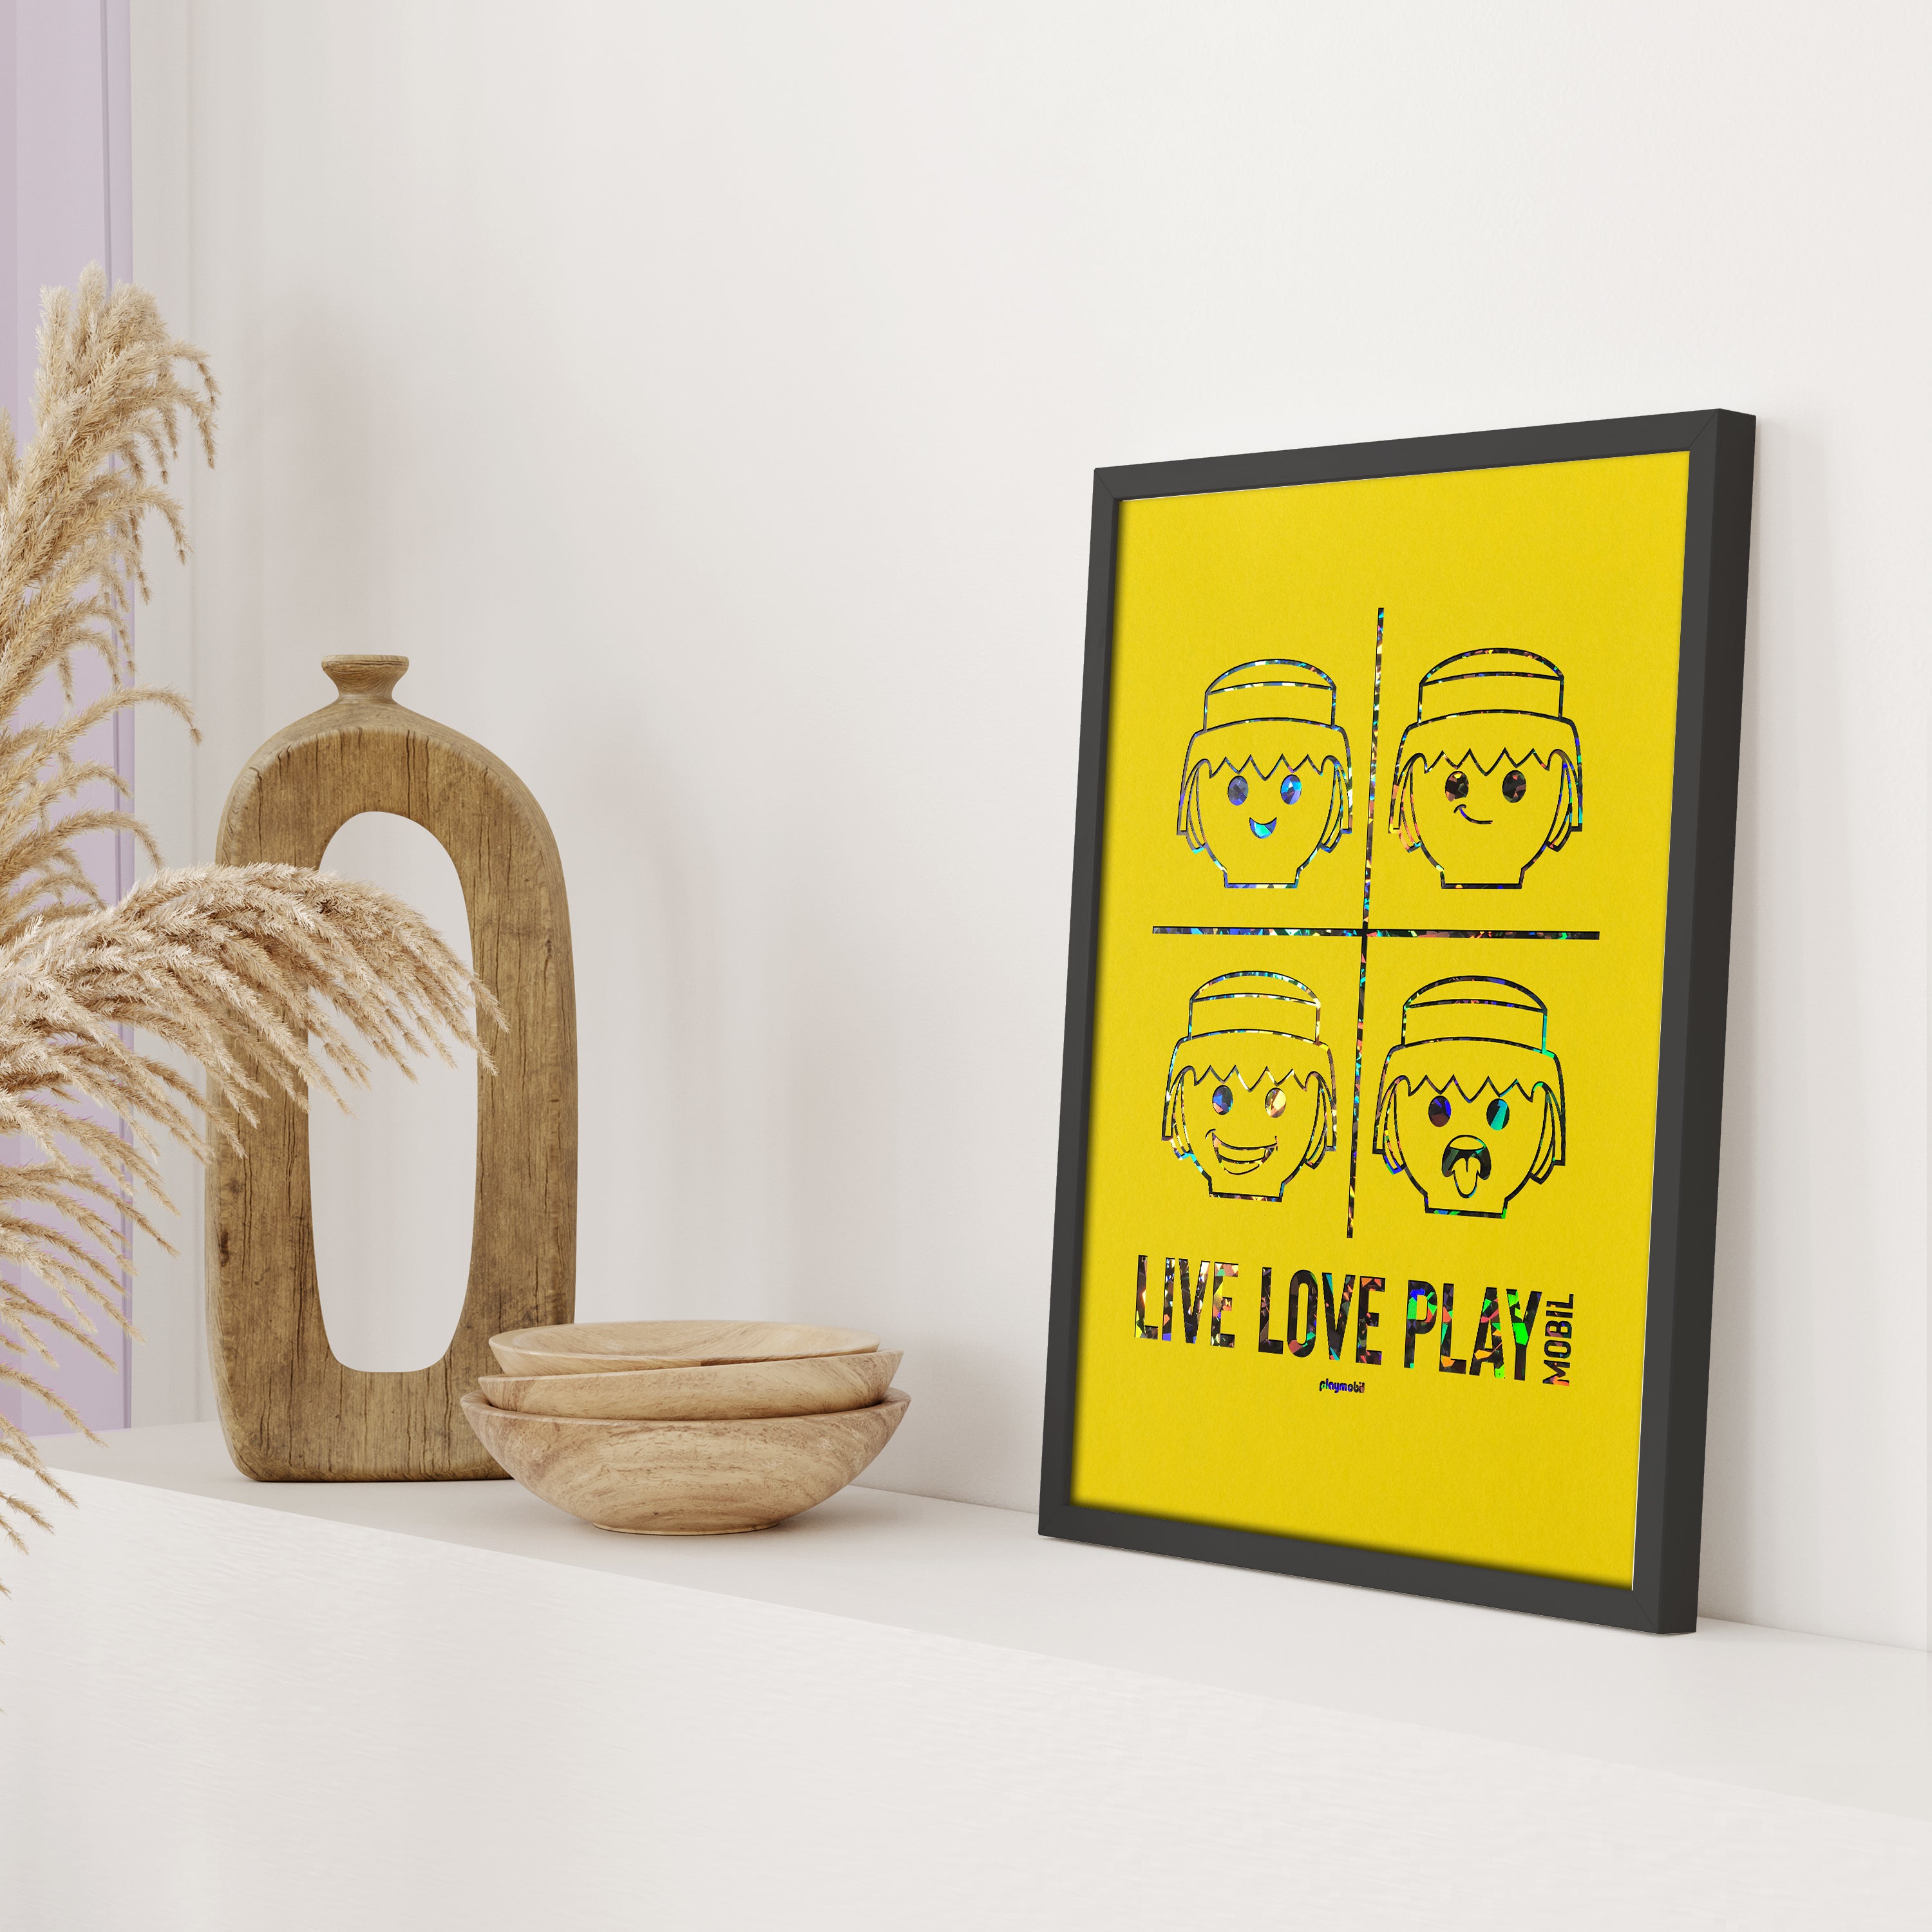 Arteonn Official PLAYMOBIL Print in bright yellow displayed at Home.